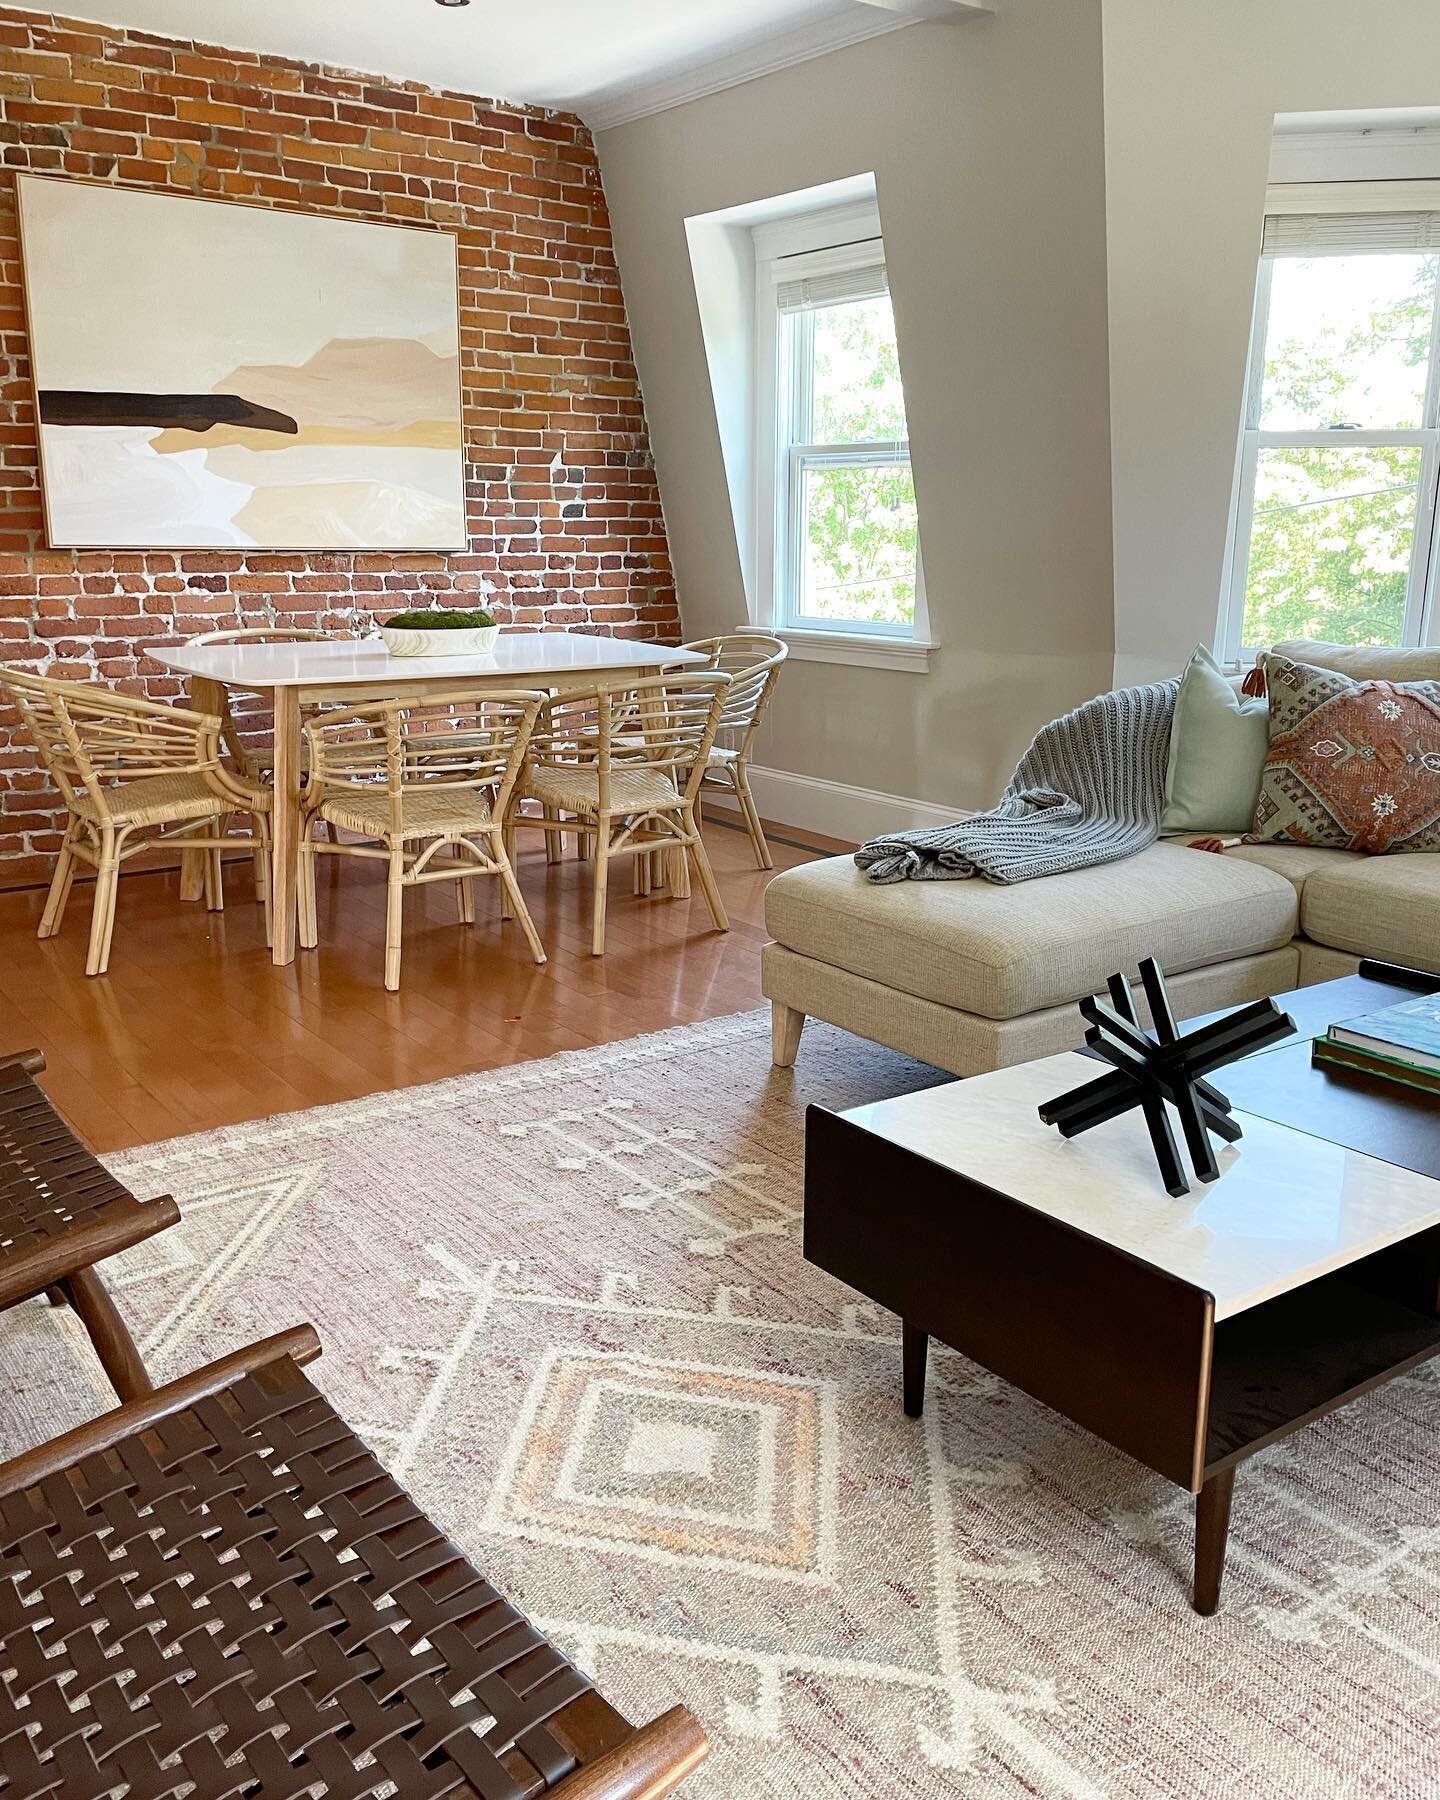 3 Seaver St in East Boston coming soon with @thepersacgroup - (2 bedrooms including a huge primary bedroom with outdoor deck!)
#bostonhomes #eastieliving #jeffriespoint